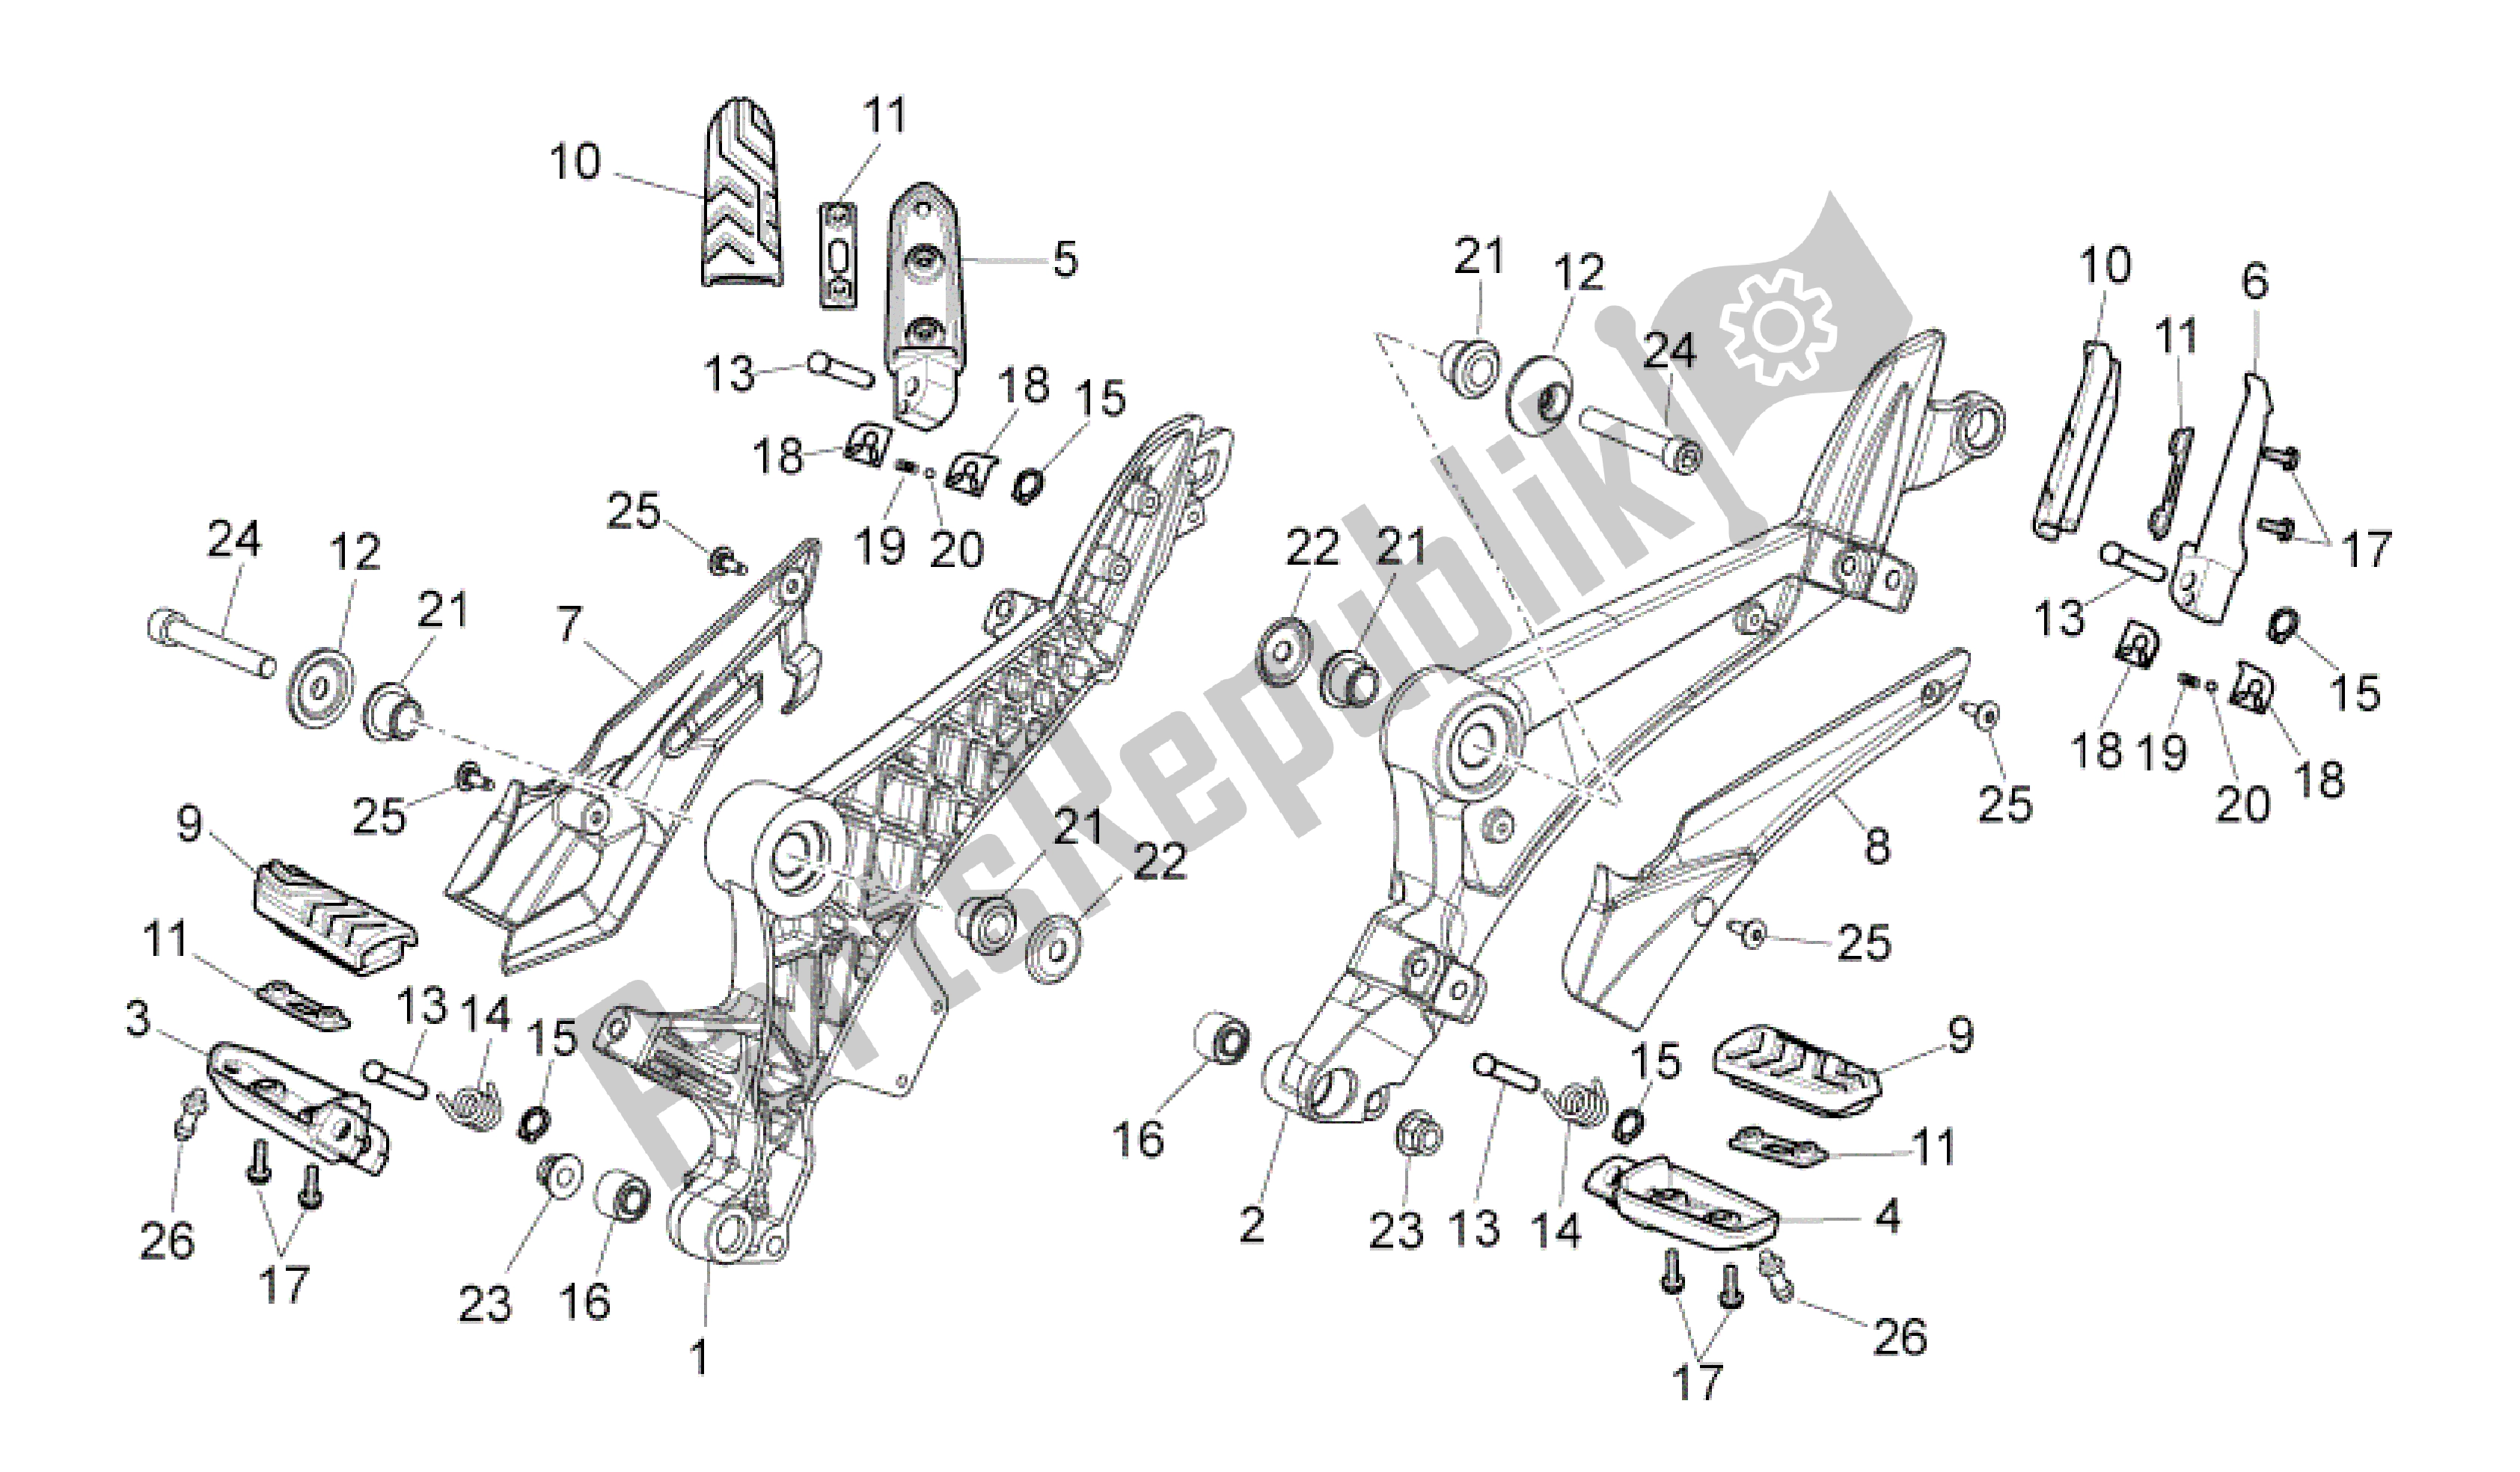 All parts for the Foot Rests of the Aprilia Mana 850 2007 - 2011